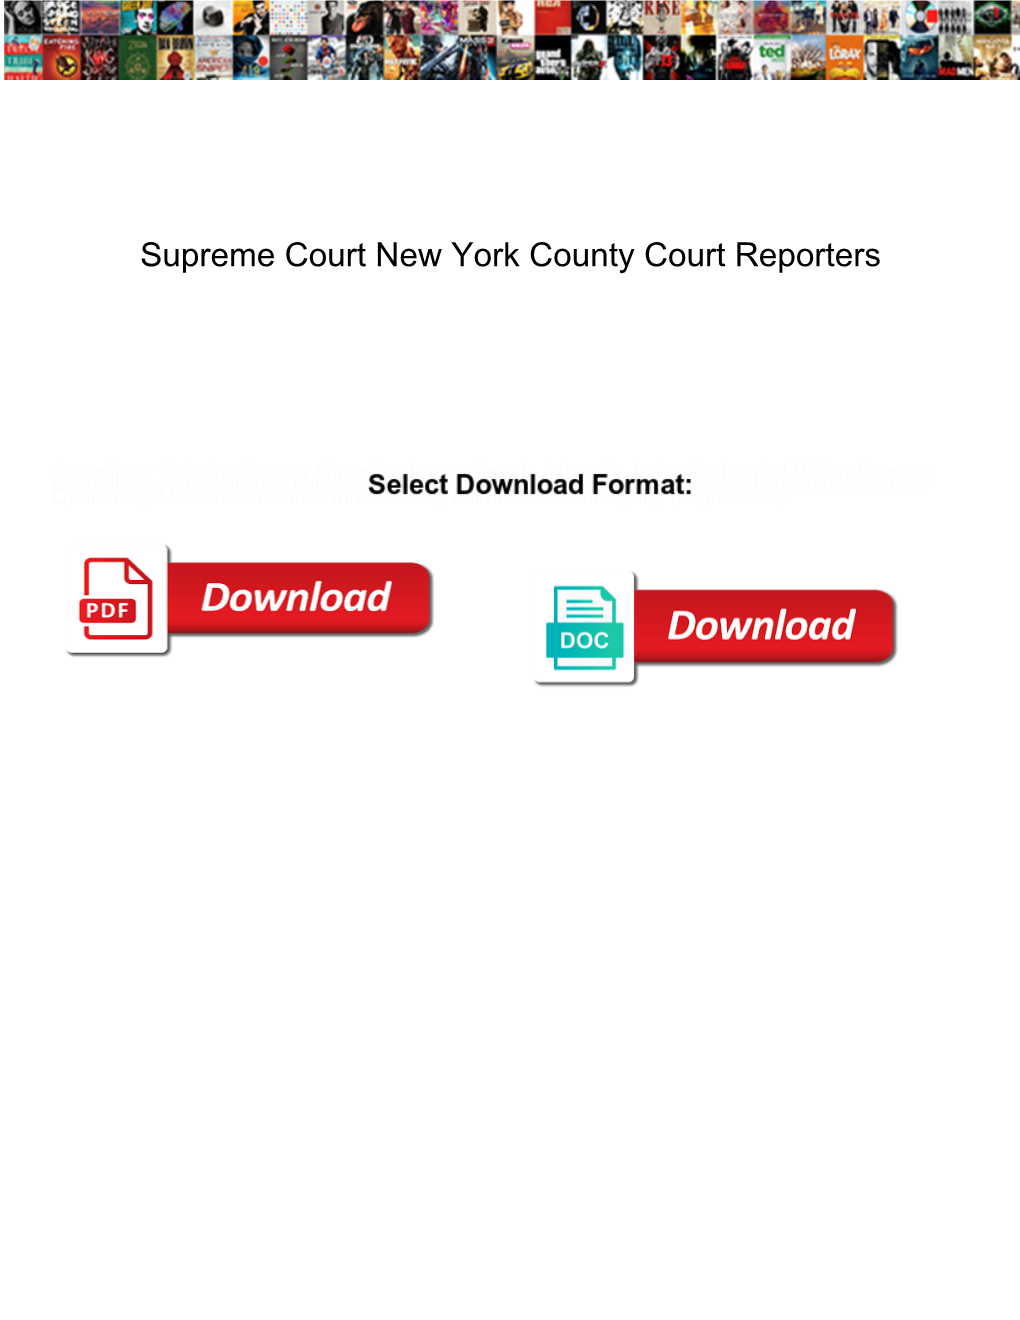 Supreme Court New York County Court Reporters